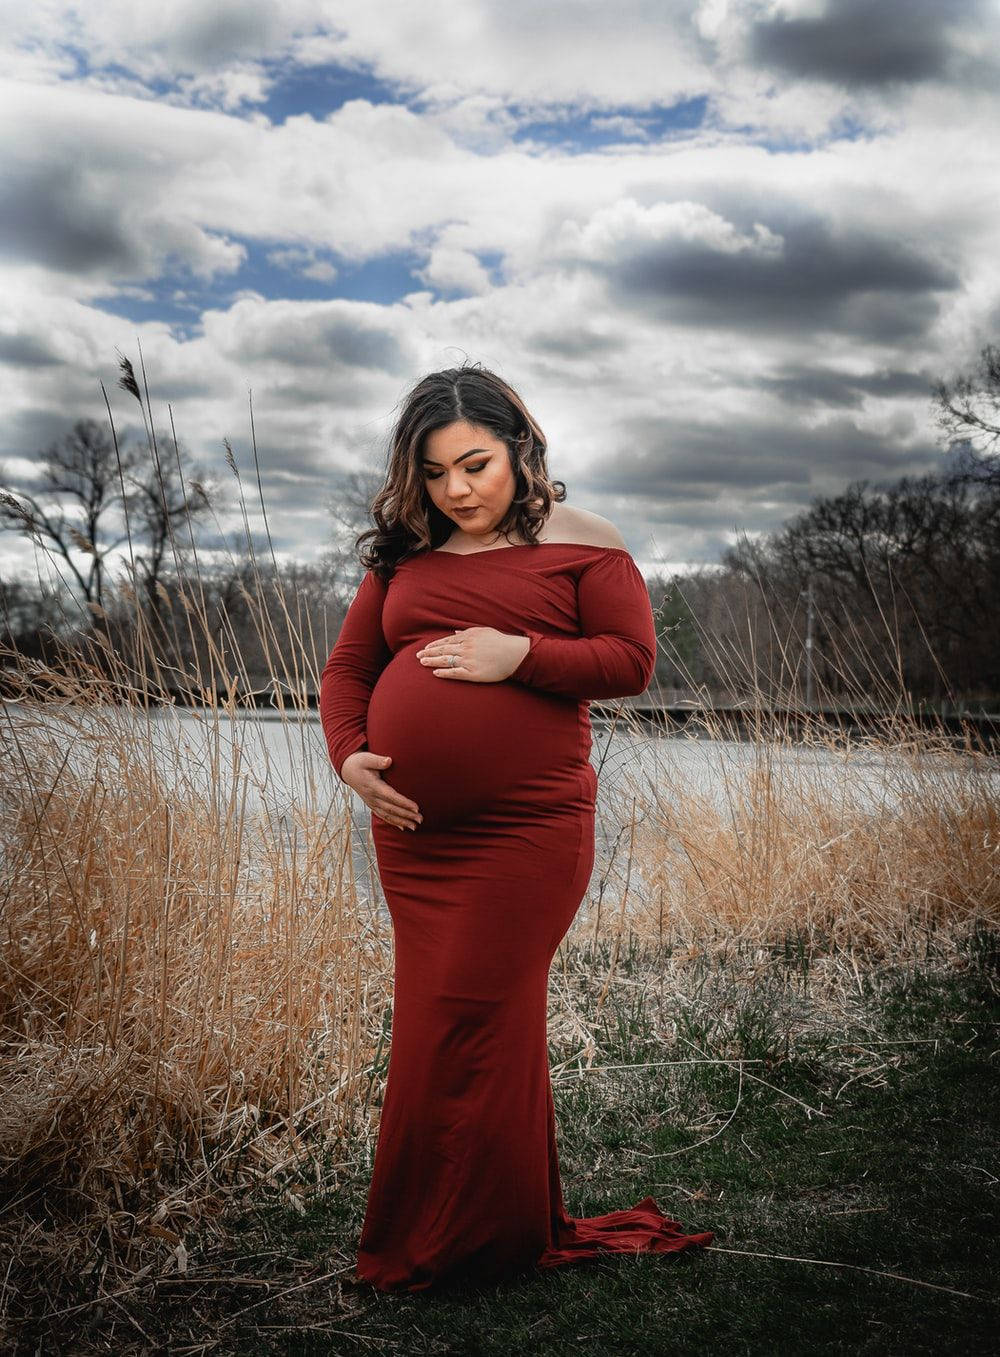 Pregnant Belly Red Dress Outside Wallpaper